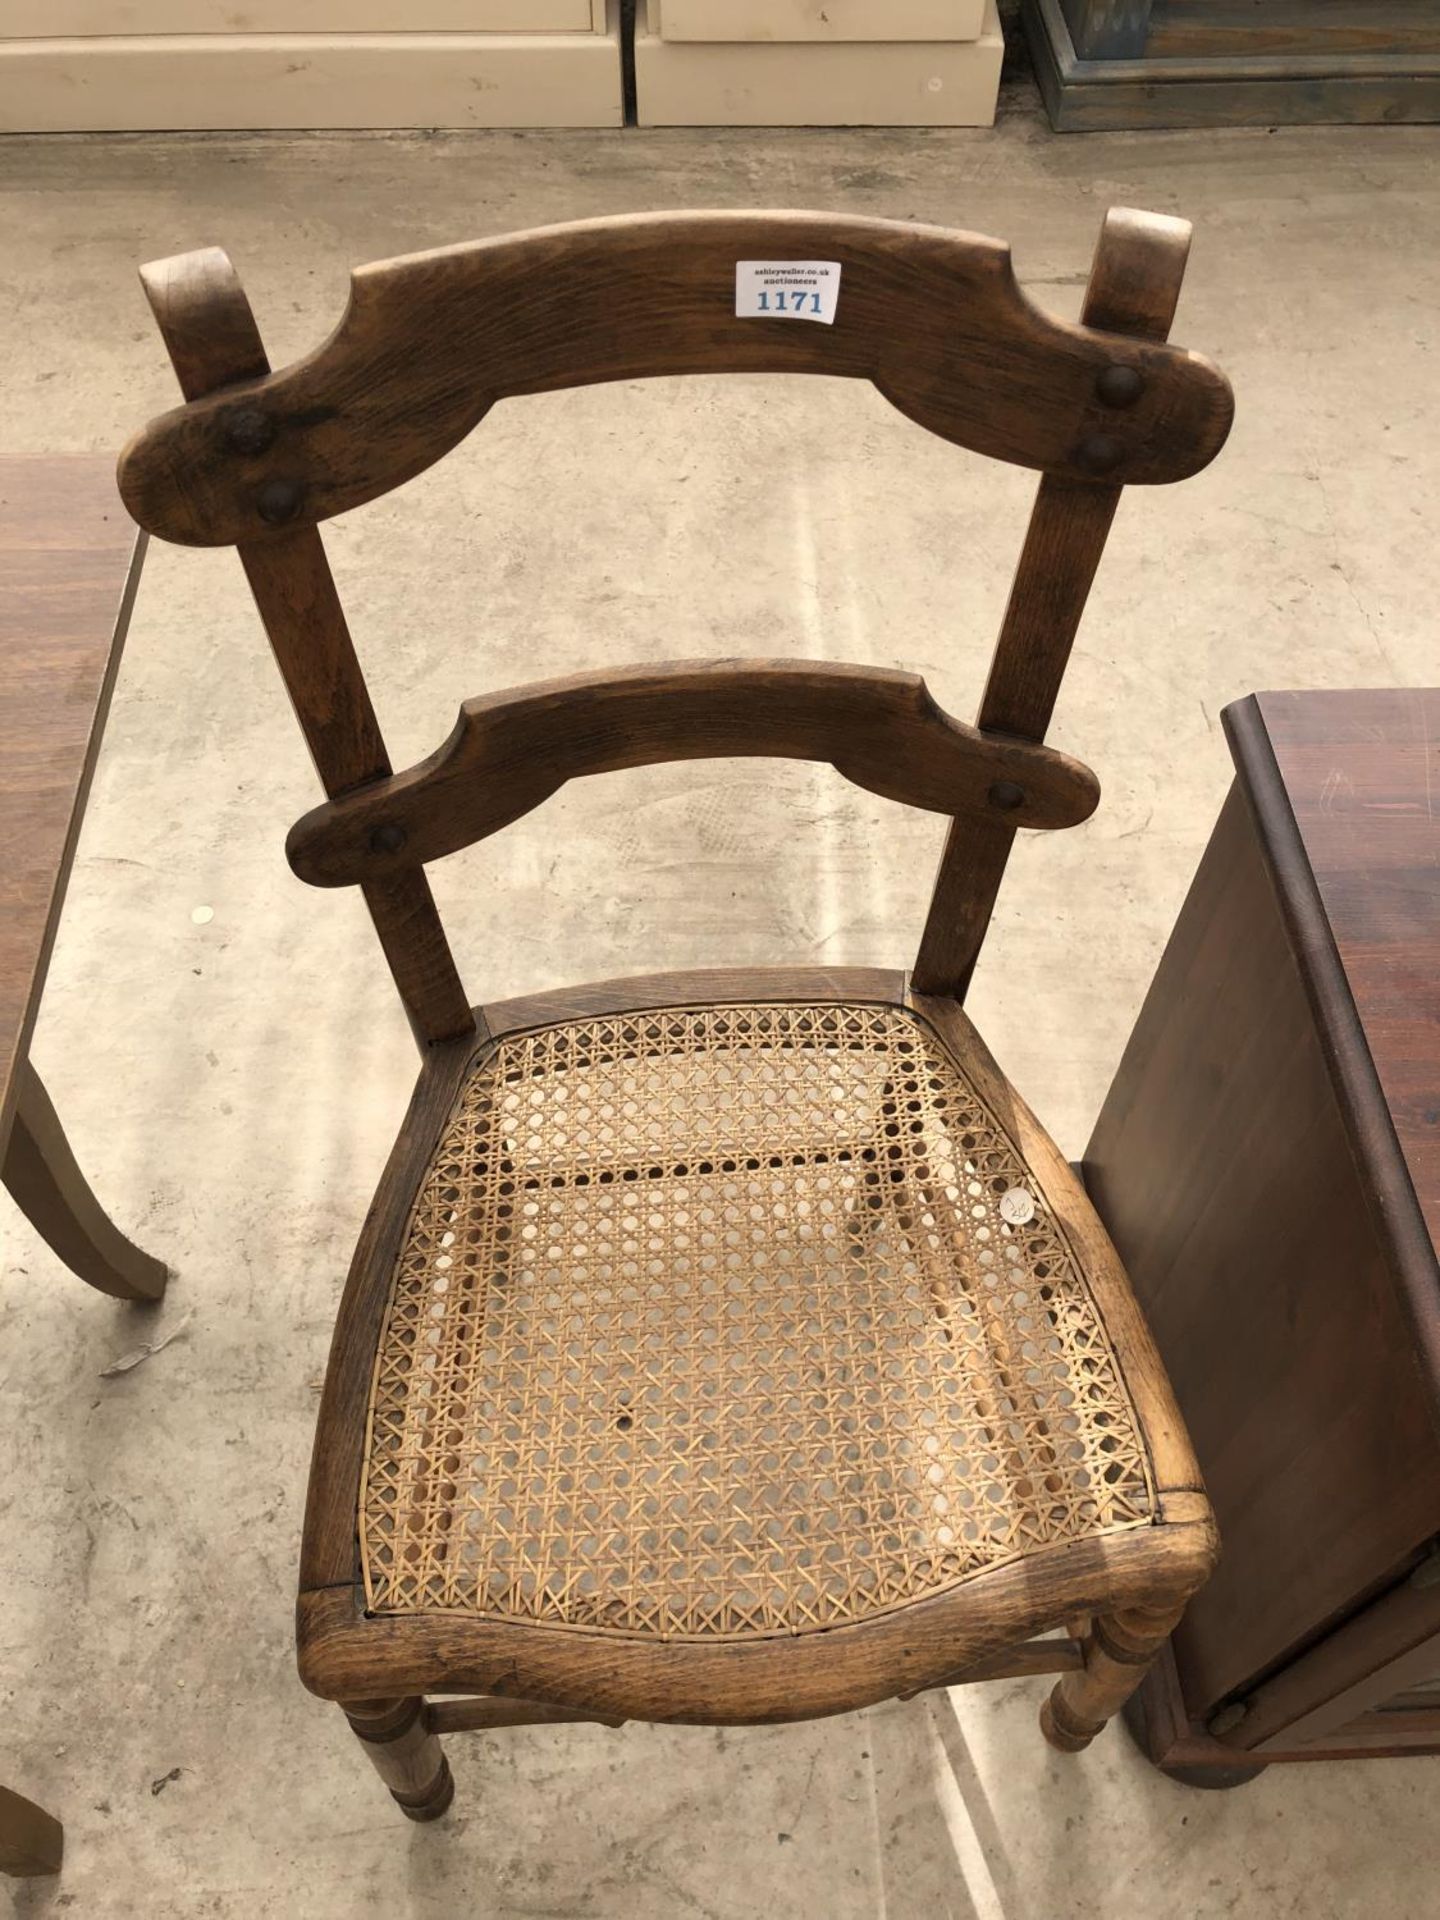 A MAHOGANY DINING CHAIR WITH RATTAN SEAT